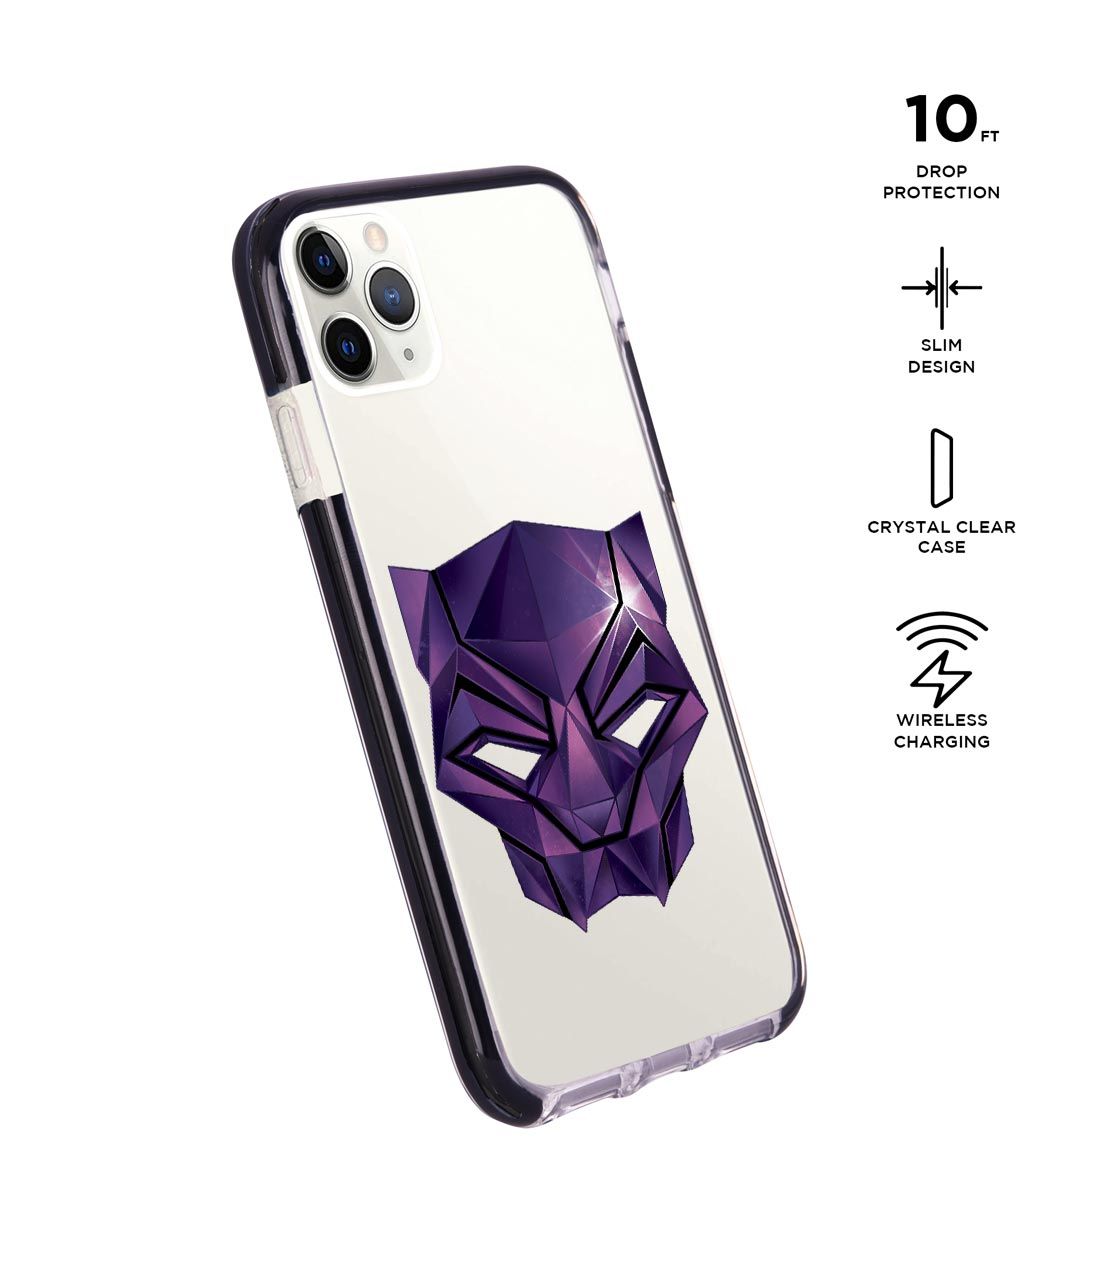 Black Panther Logo - Extreme Phone Case for iPhone 11 Pro